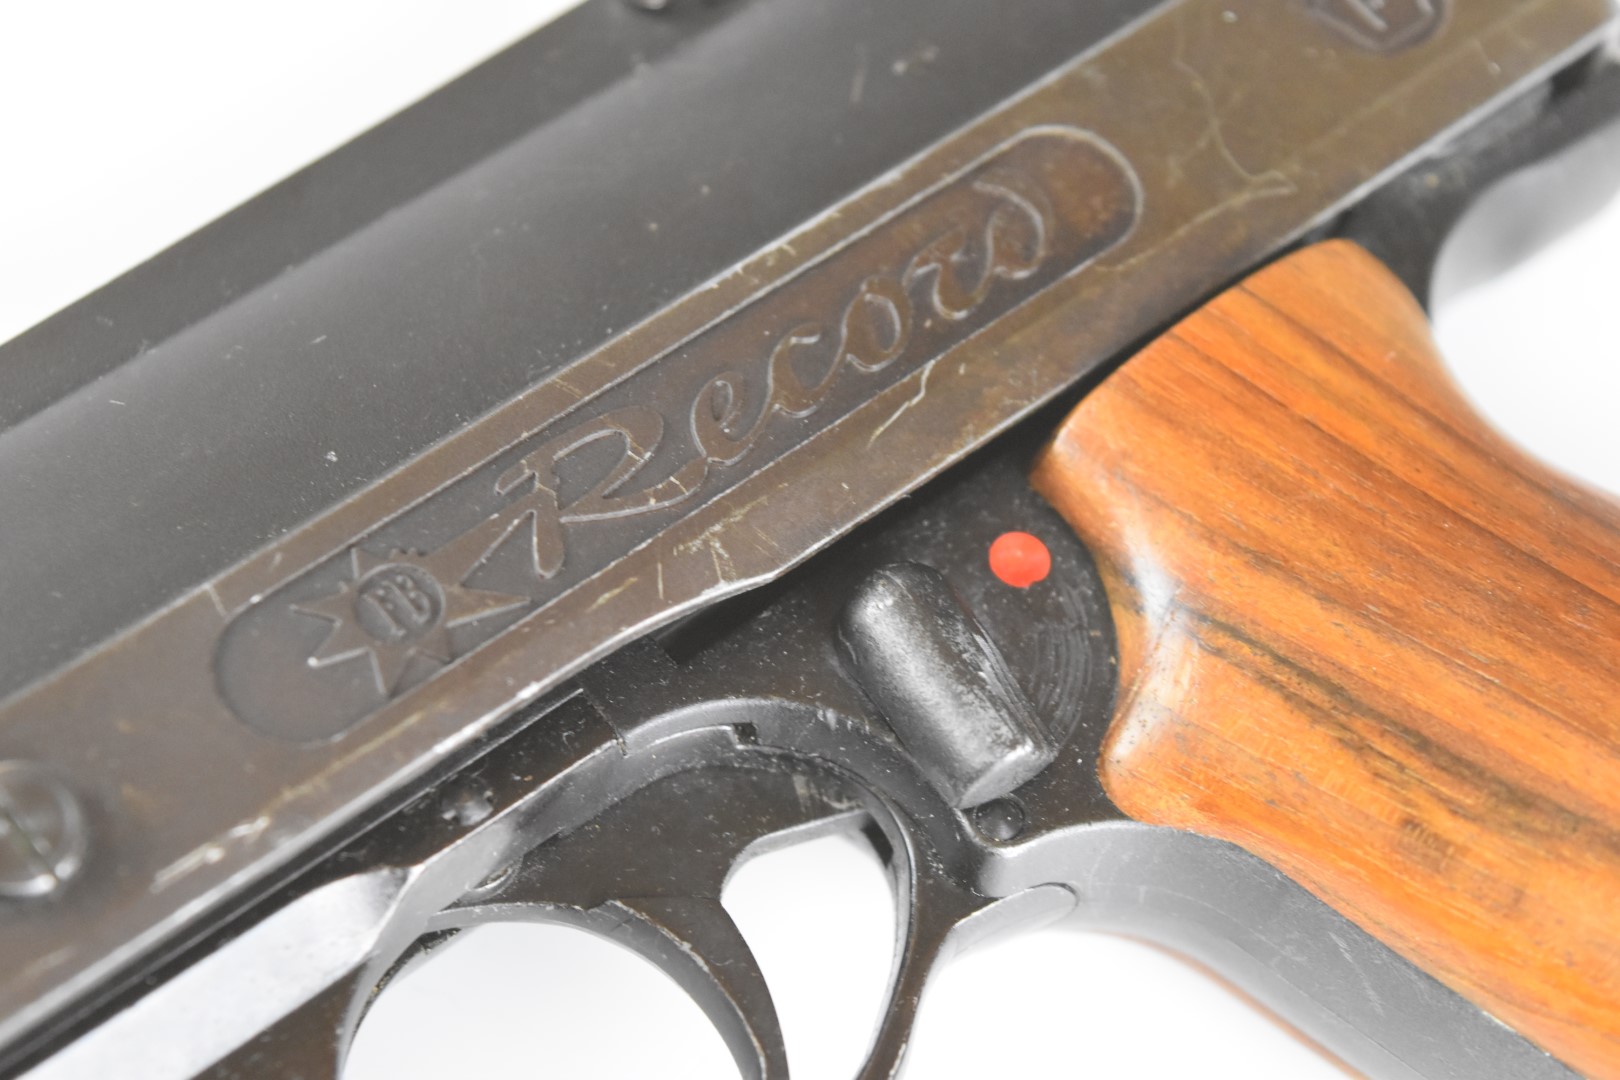 FB Record Jumbo .177 air pistol with shaped wooden grips and adjustable sights, serial number 10792. - Image 9 of 12